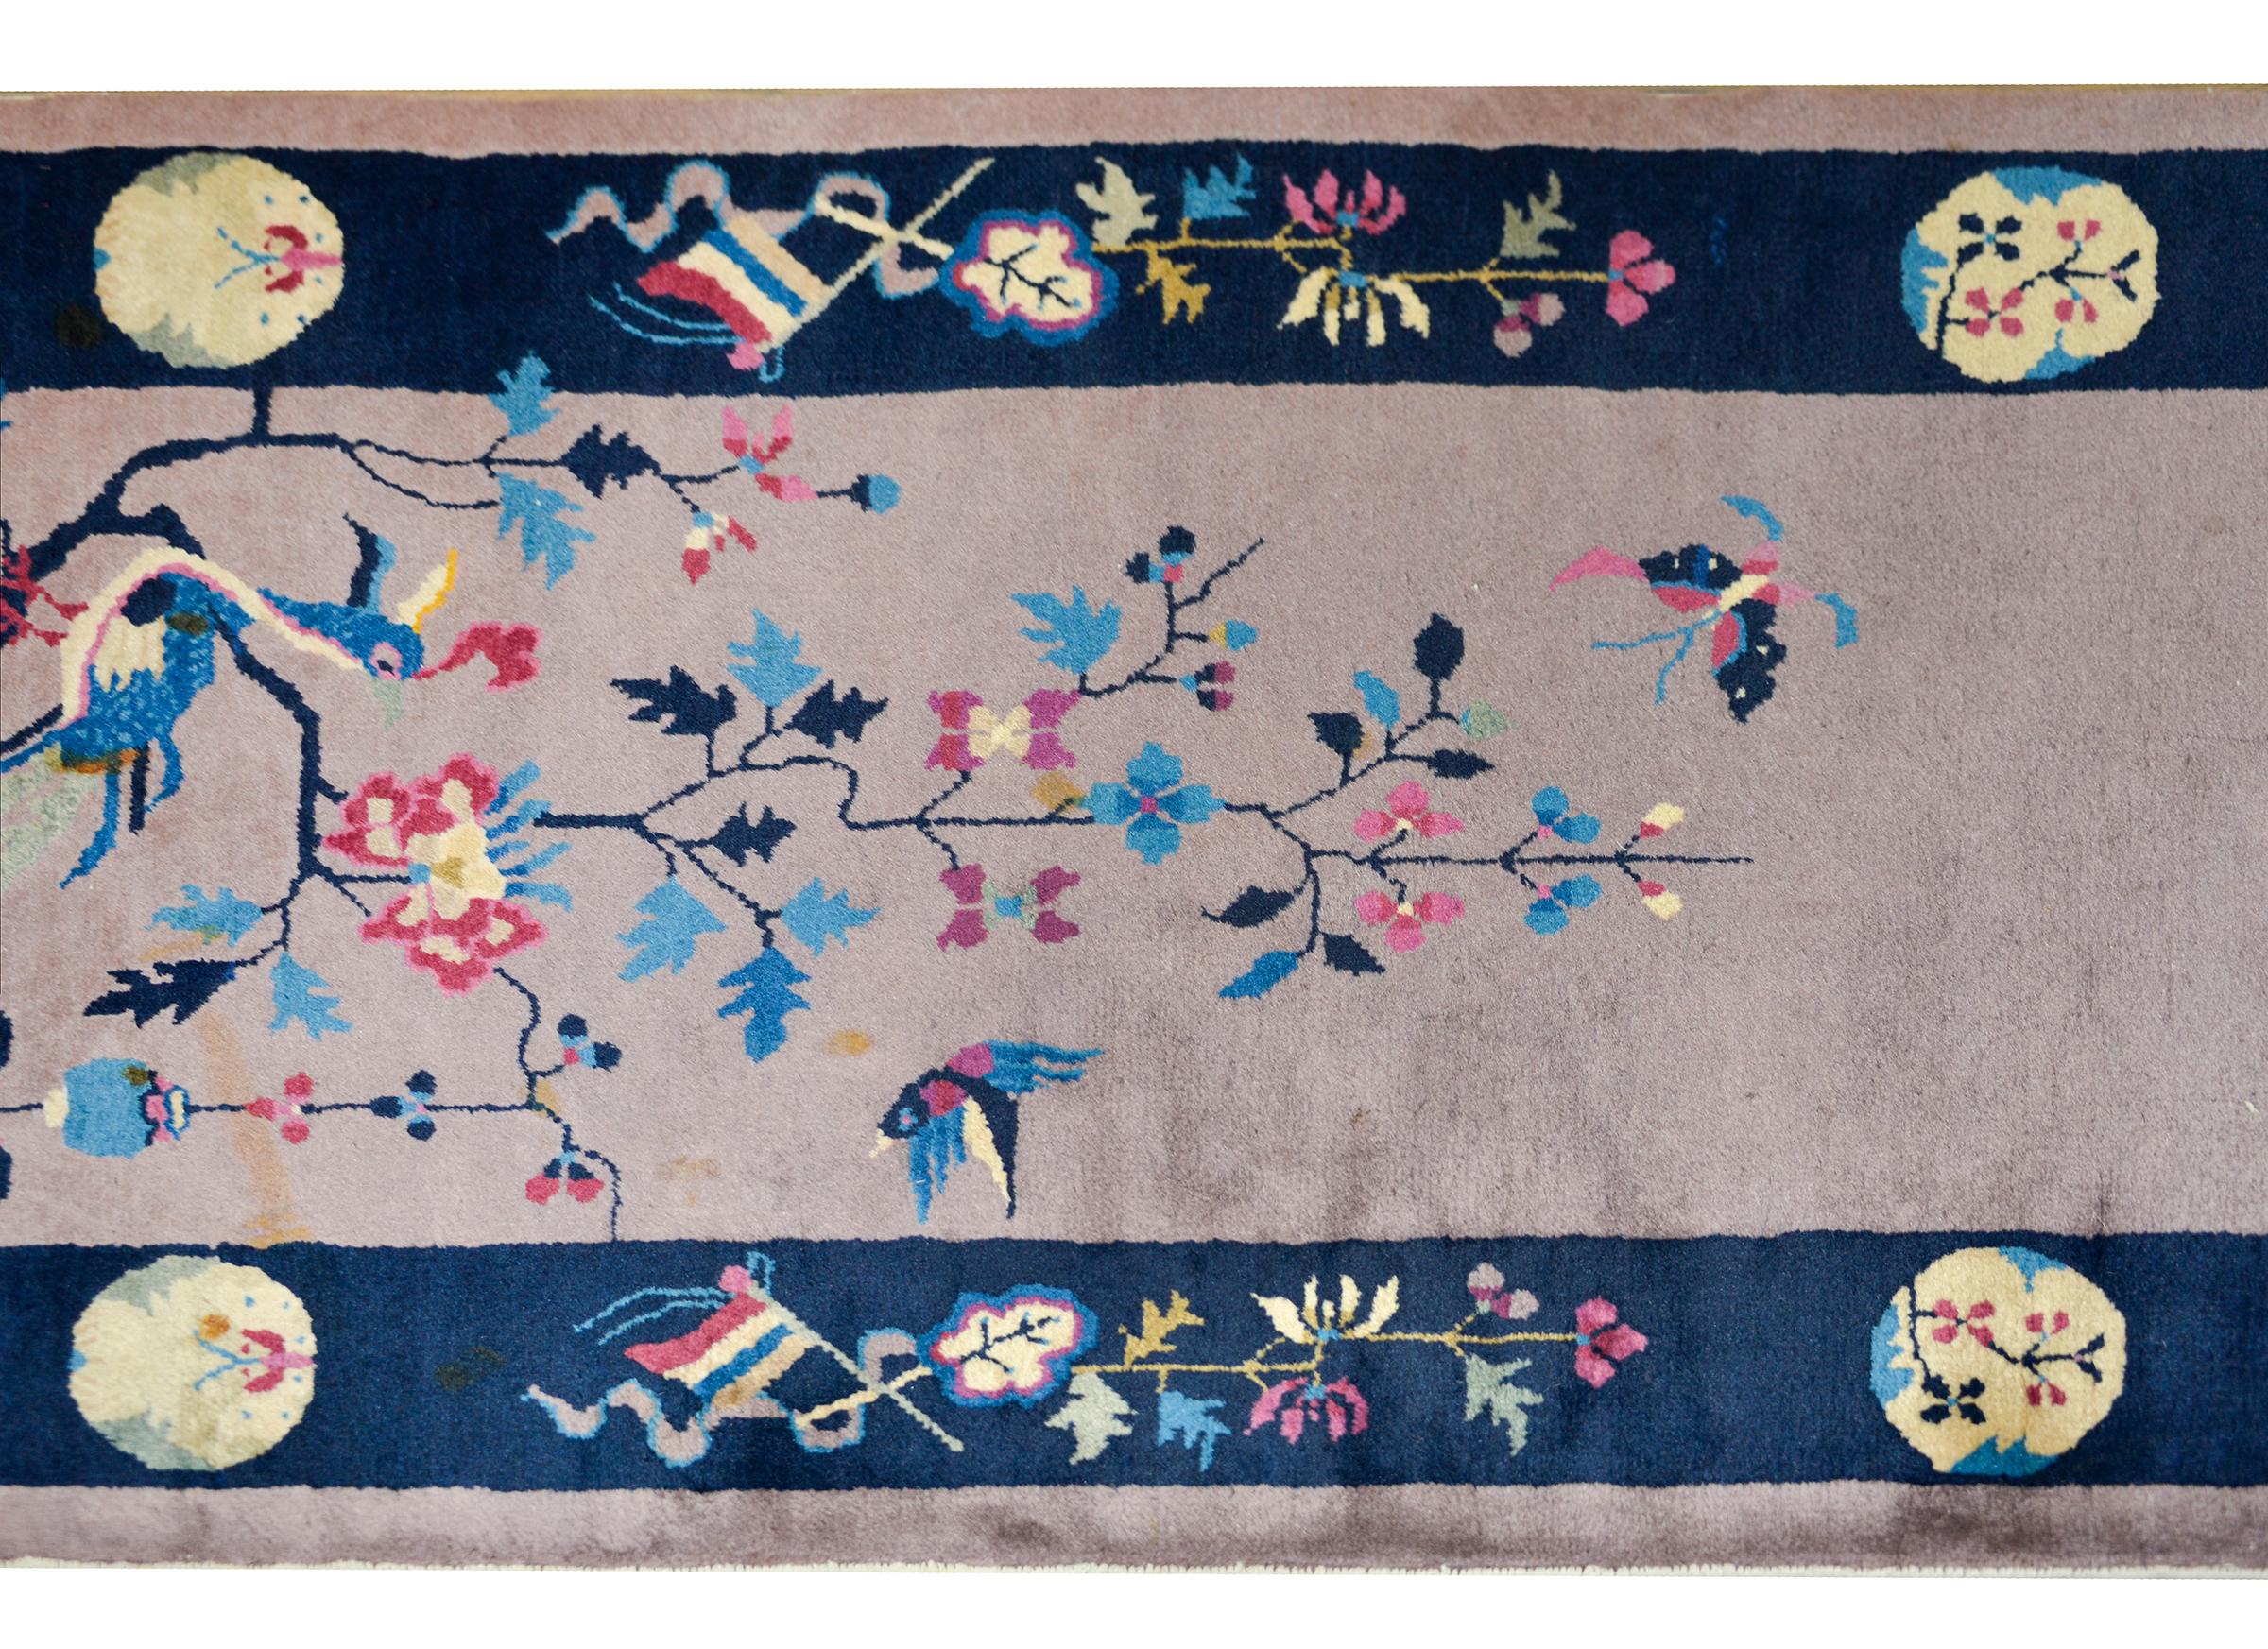 An early 20th century Chinese Art Deco runner with a central medallion depicting a vase potted with a flowering lotus, and flowering trees on either end, and all set abasing a gray field with a wide indigo striped border with a floral pattern.